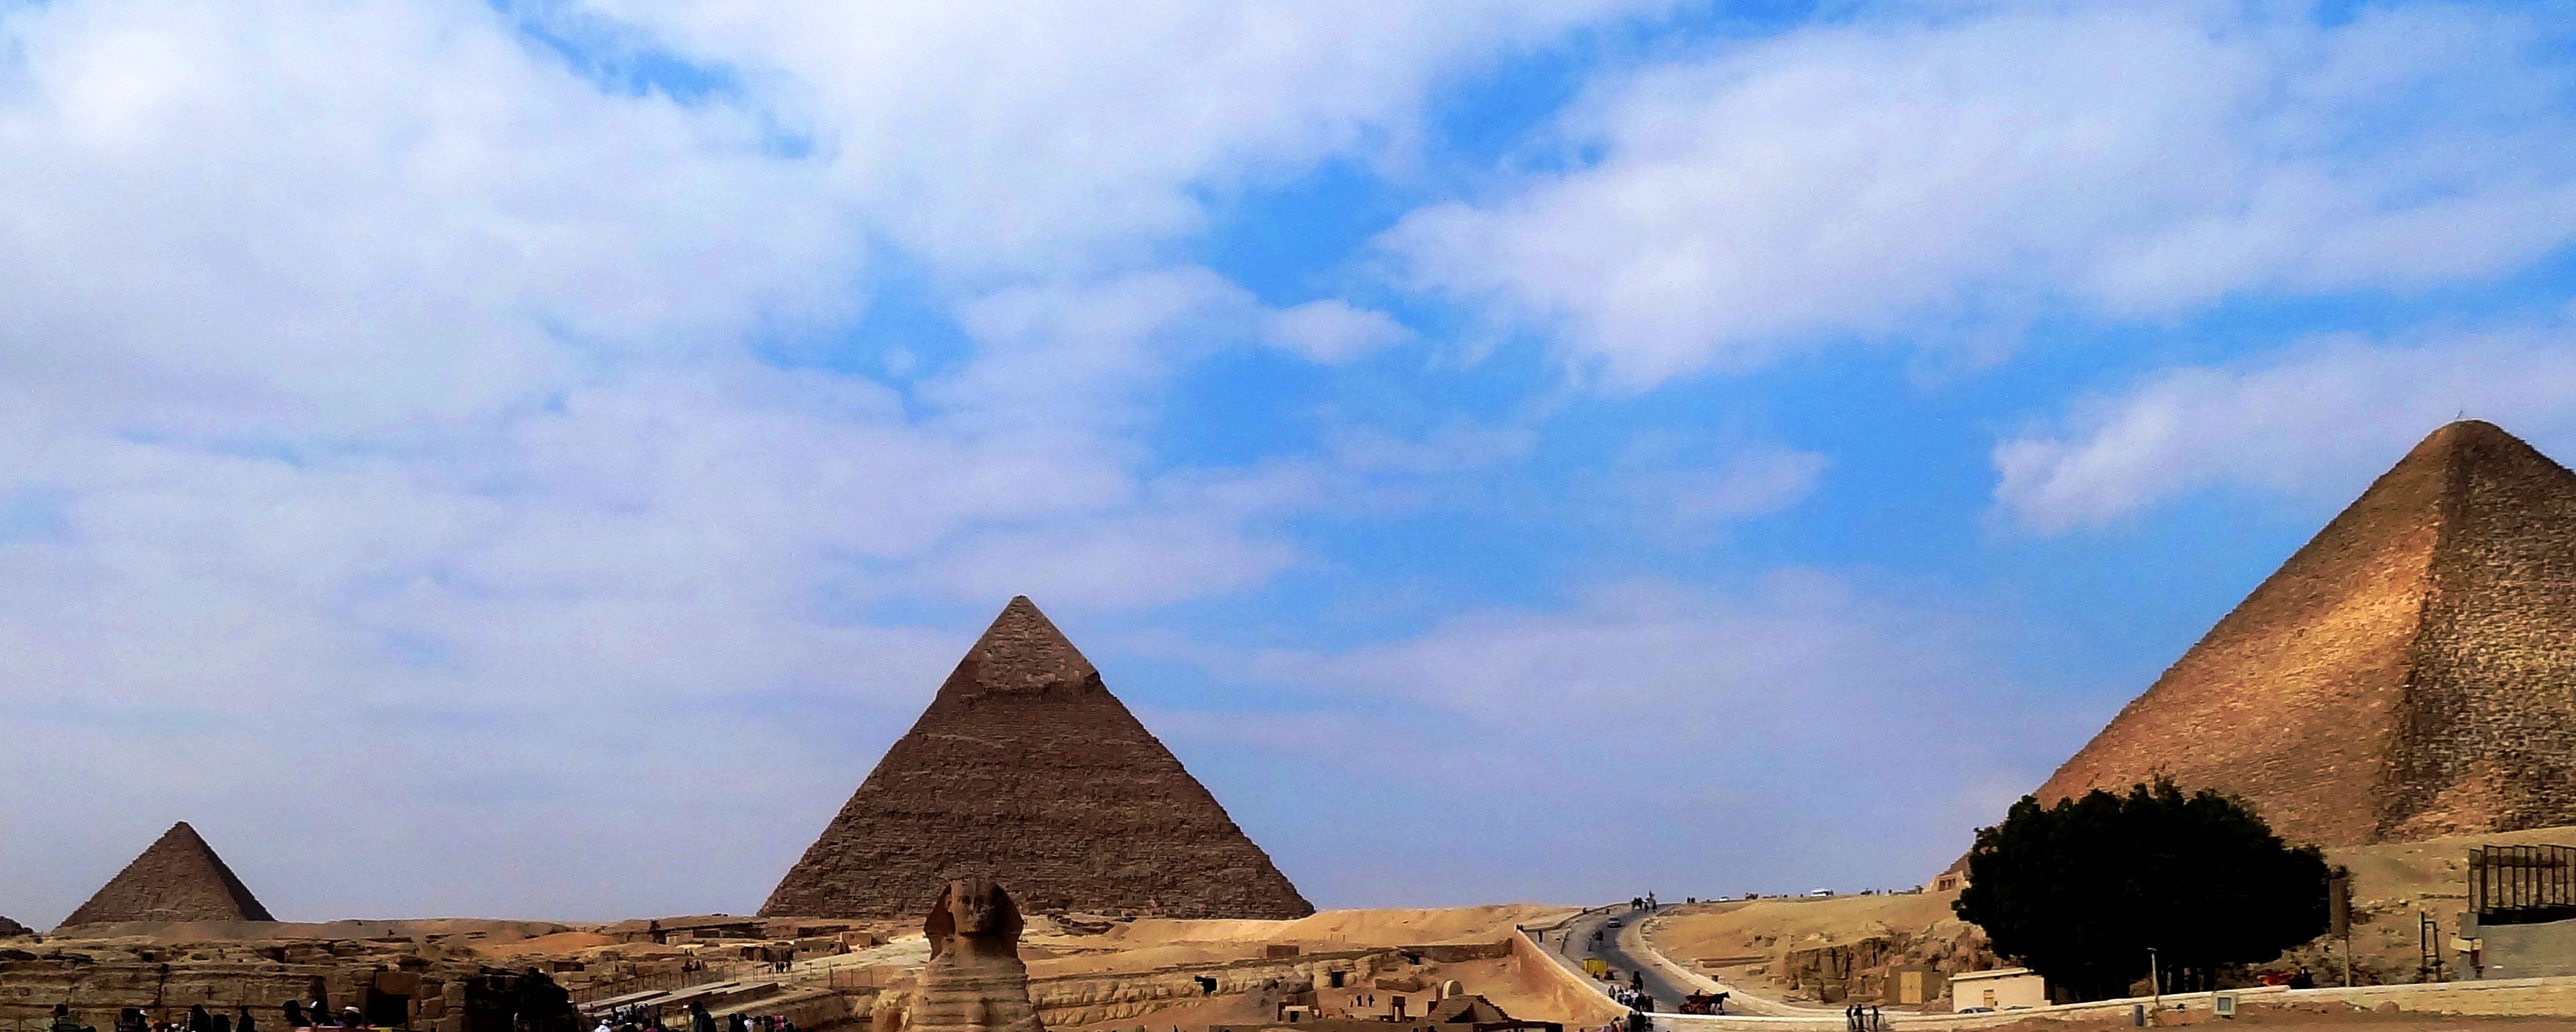 Best Of Cairo In 72 Hours - Things To Do In Cairo